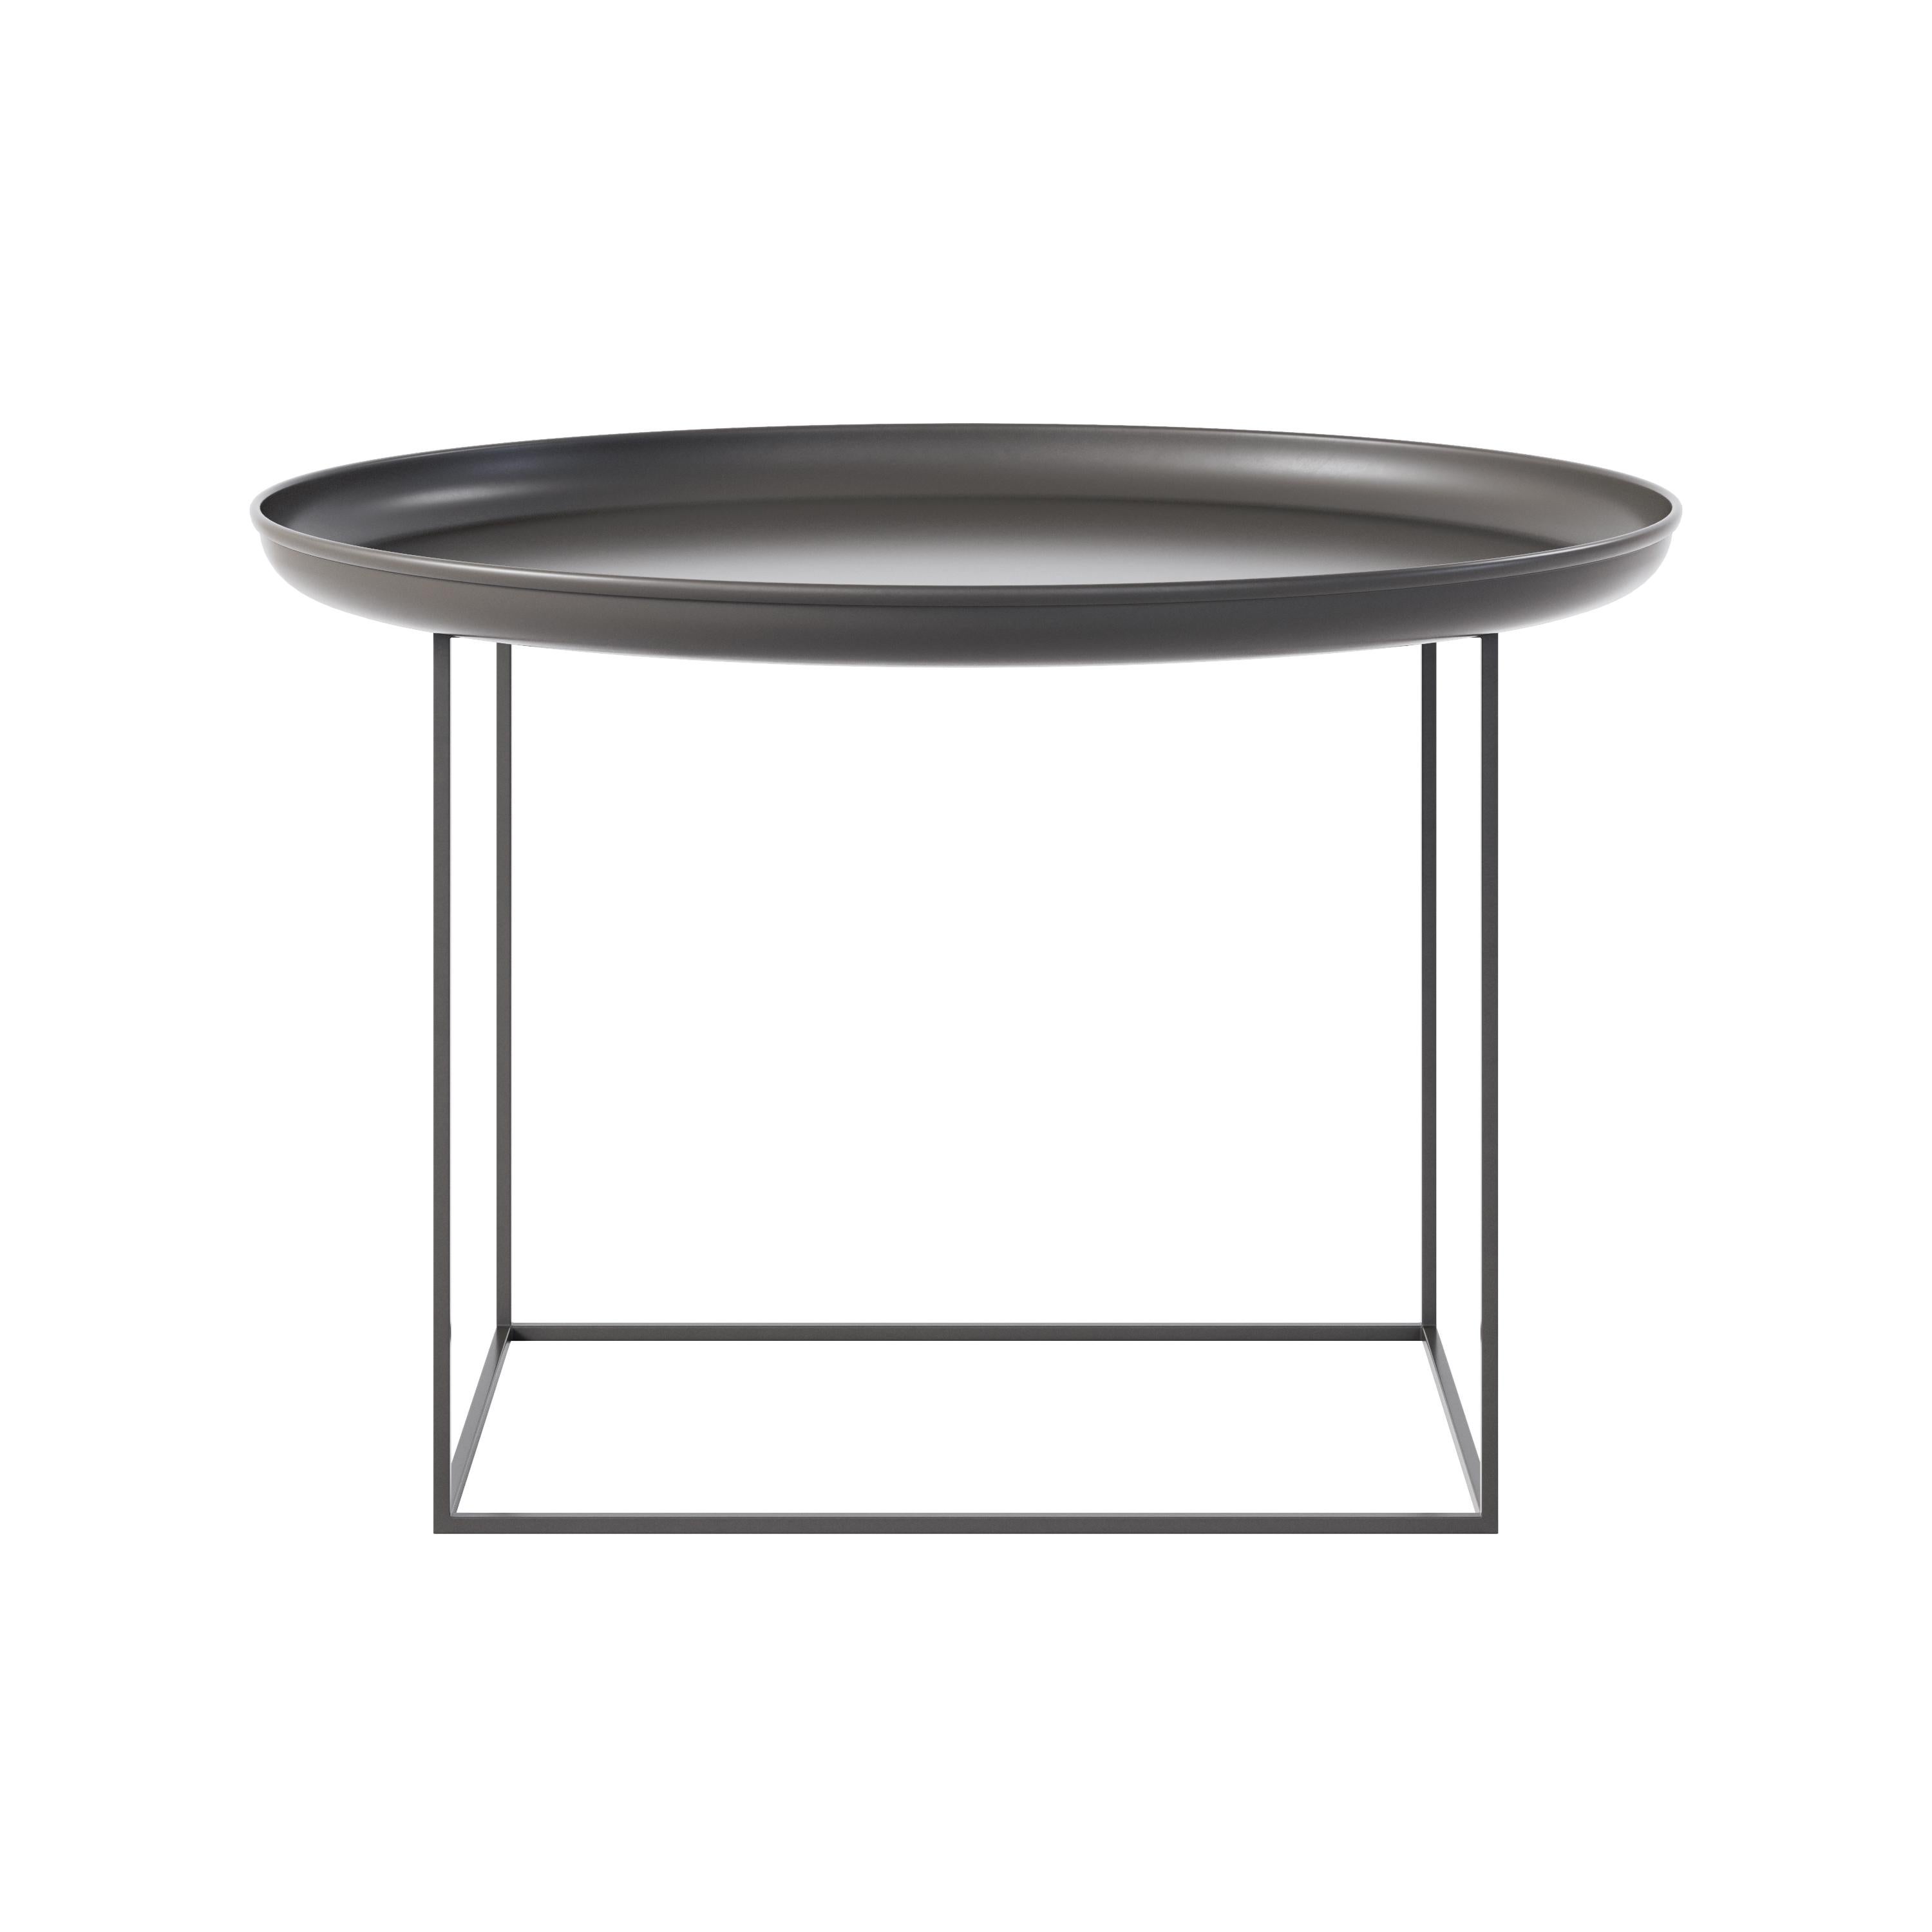 Duke Medium Antique White Iron Coffee Table by NORR11
Dimensions: Ø 70 x H 39/45/53 cm.
Materials: Powder coated iron.

Available in three different sizes. Different colors available: Antique White, Stone, Earth Black, Bronze, Lacquered Obsidian